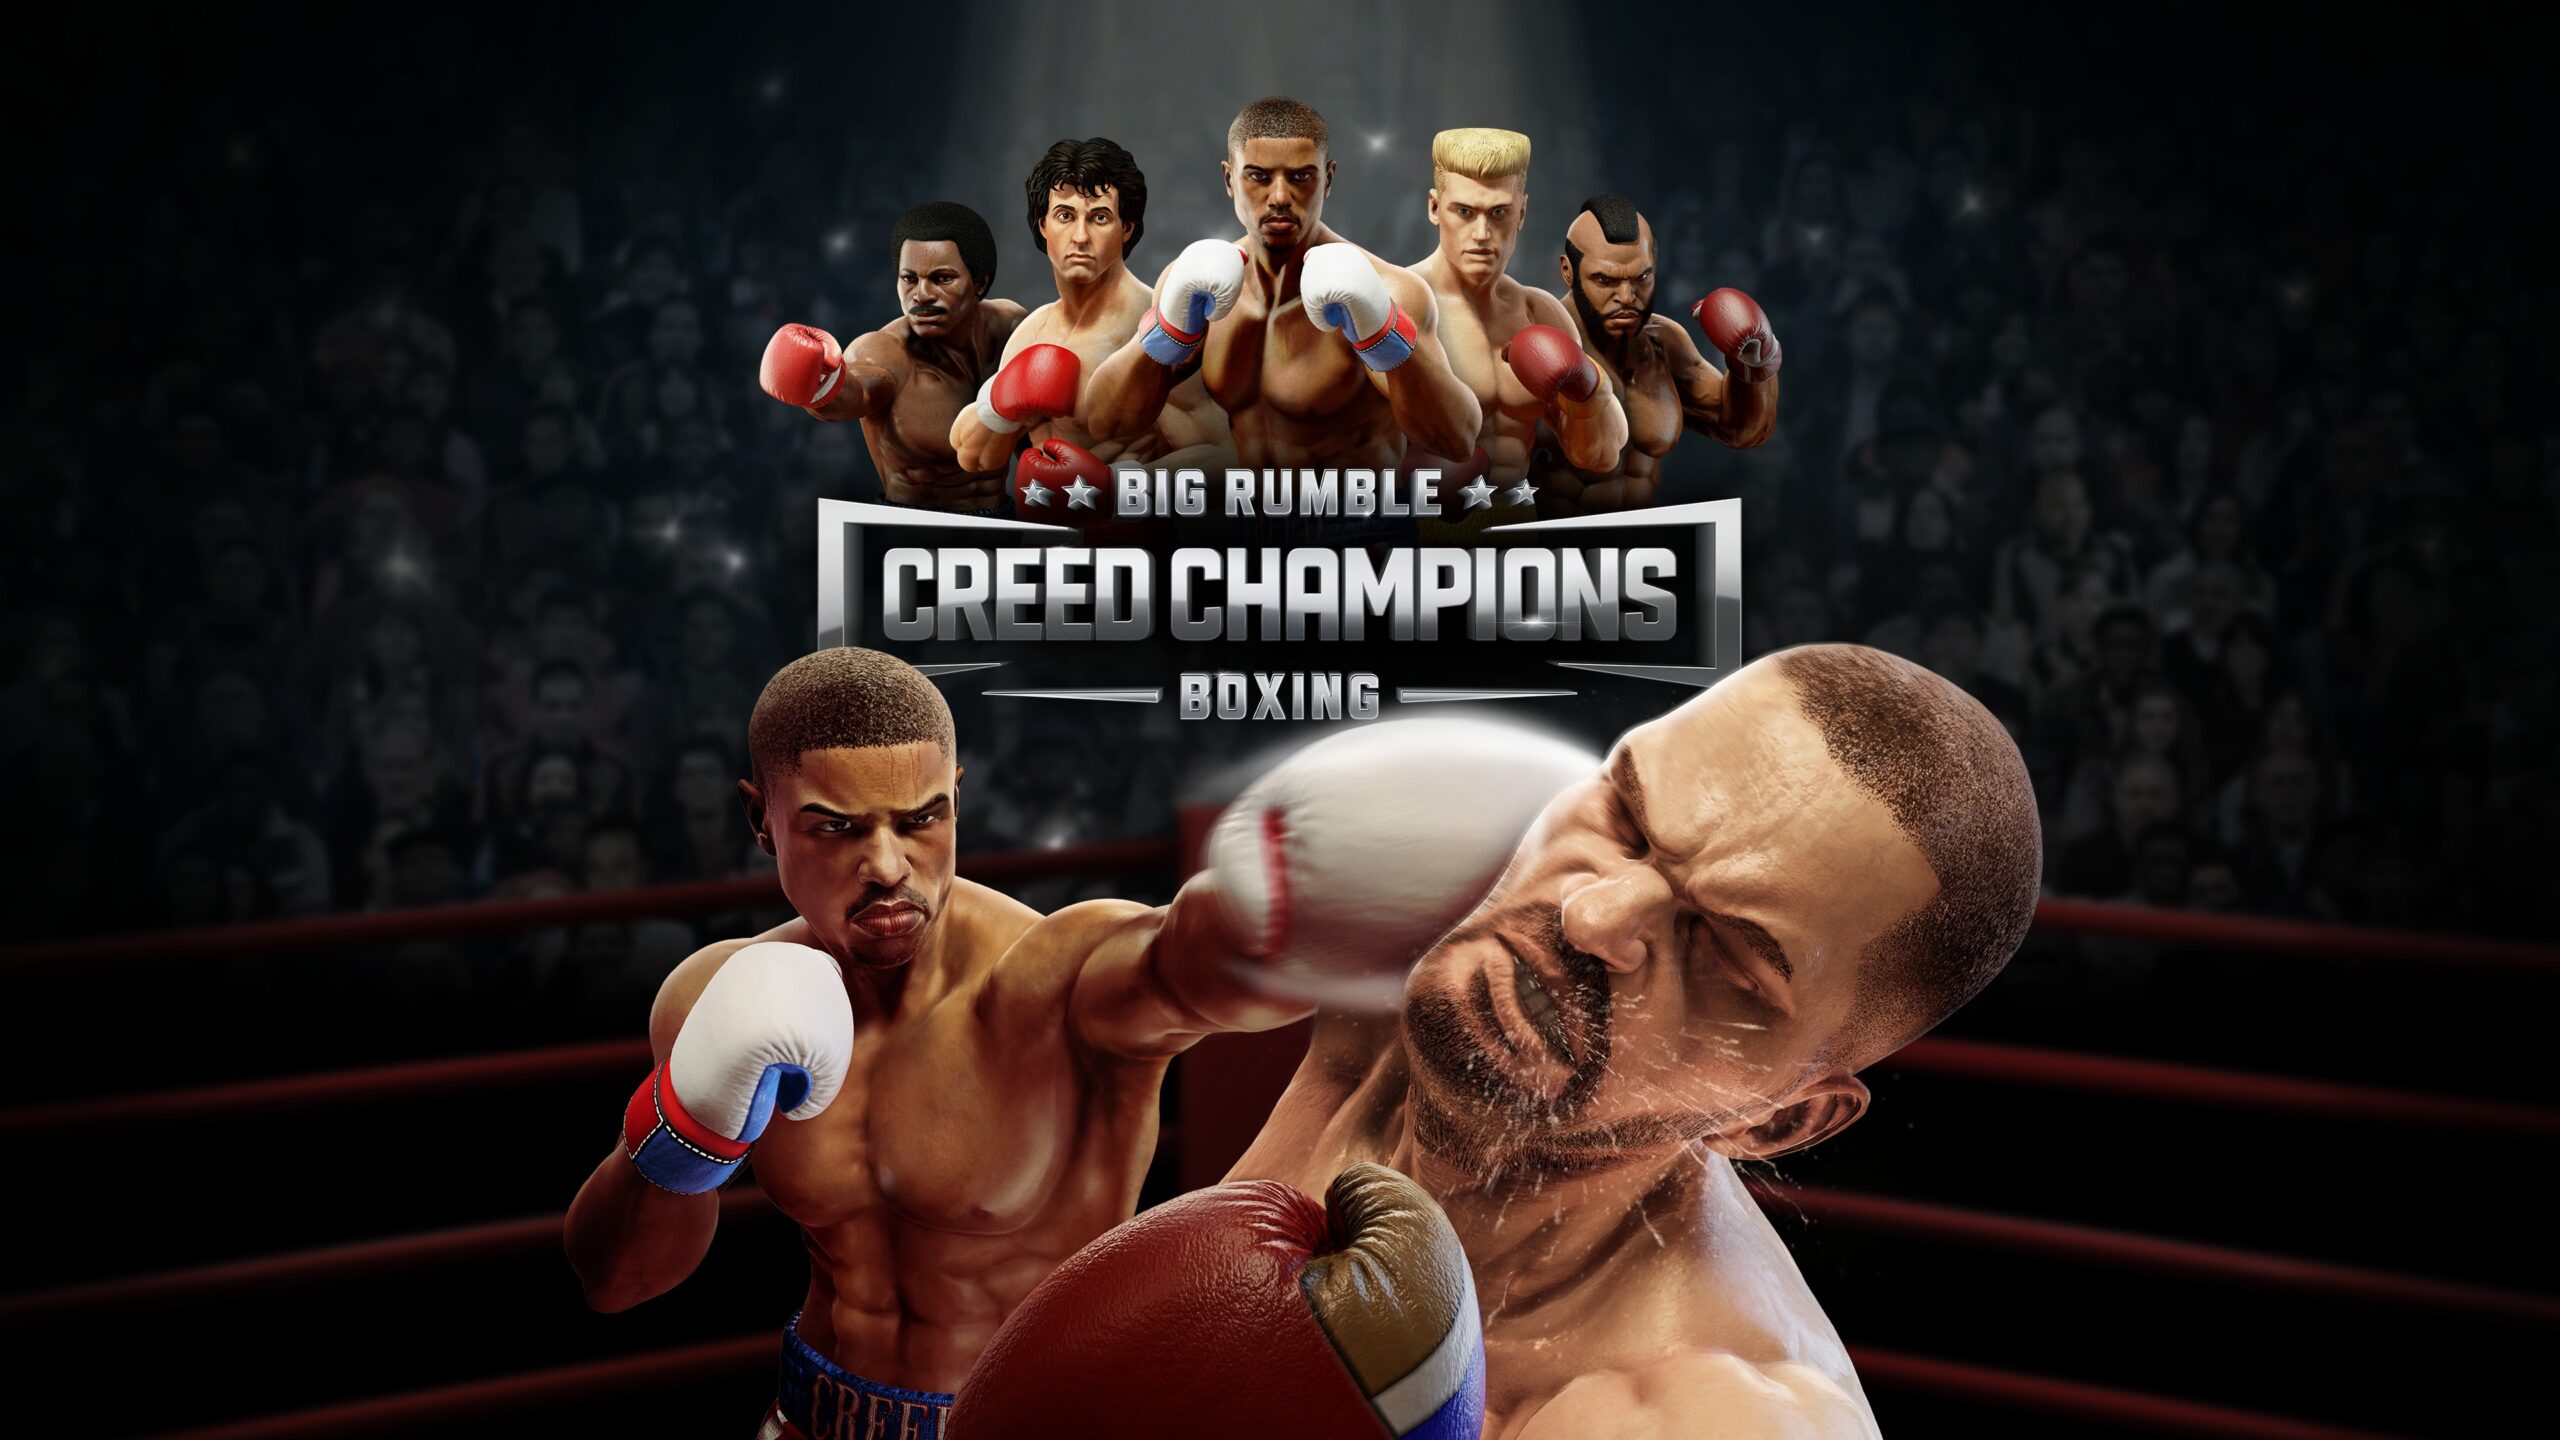 Rocky Balboa and Adonis Creed are coming to Nintendo Switch, PS Xbox One and Steam in Big Rumble Boxing: Creed Champions on September 3rd!